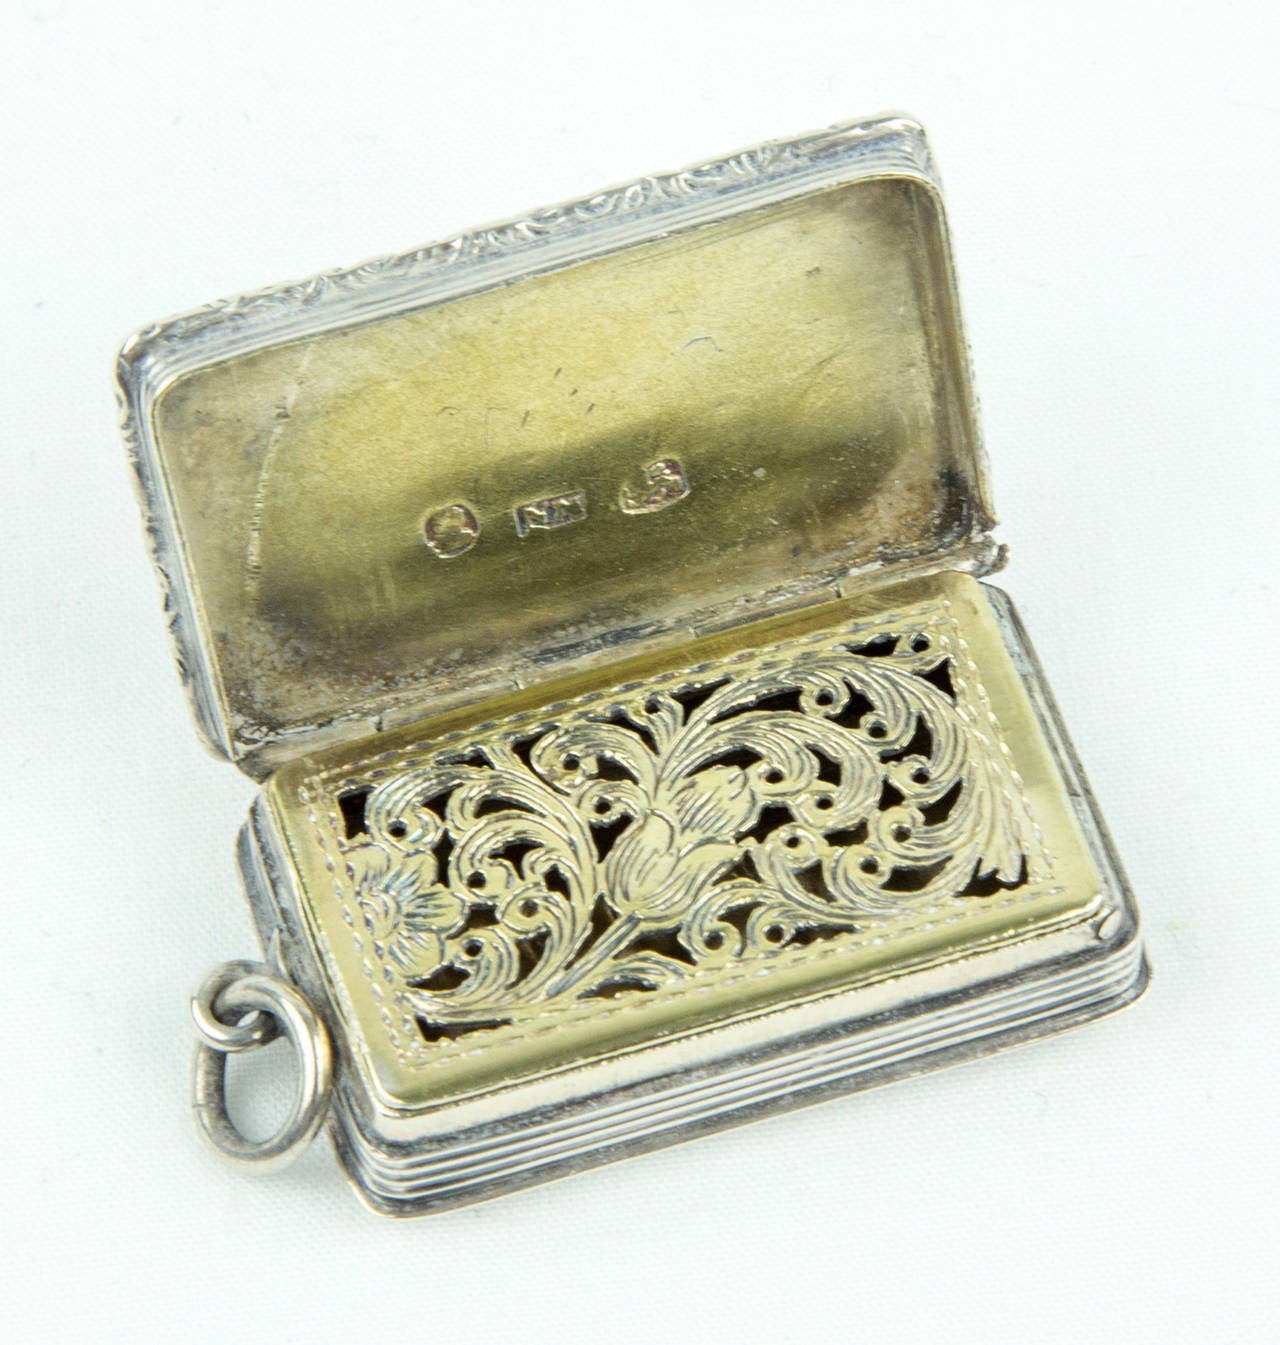 Simply Exquisite! Vintage Georgian Heirloom Sterling Silver vinaigrette by Nathaniel Mills shaped rectangular form, the lid and base finely engraved; top has a central initialed cartouche and applied raised foliate scroll border, the sides with